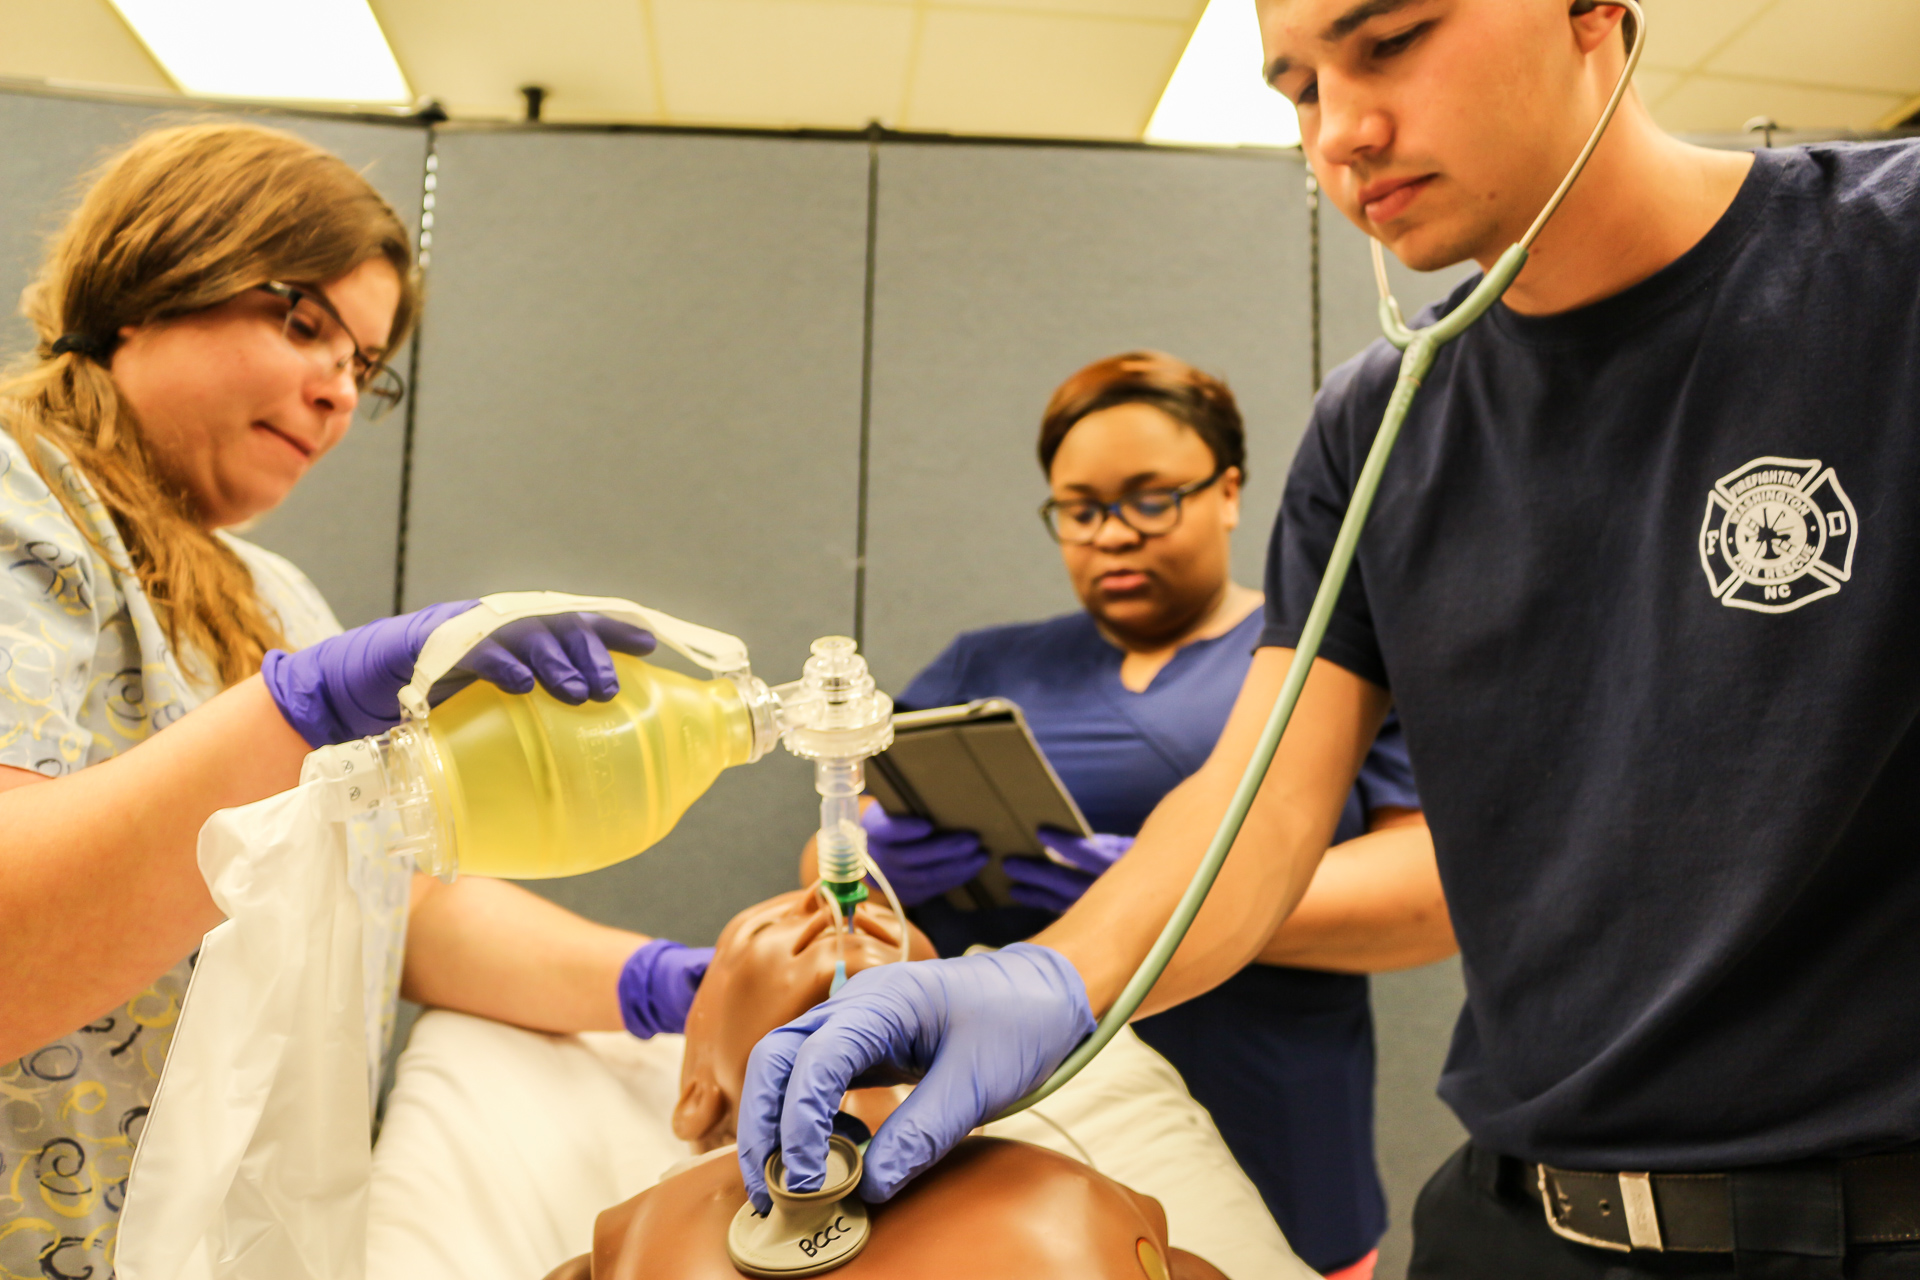 One student uses a stethoscope on a dummy while another ventilates it.